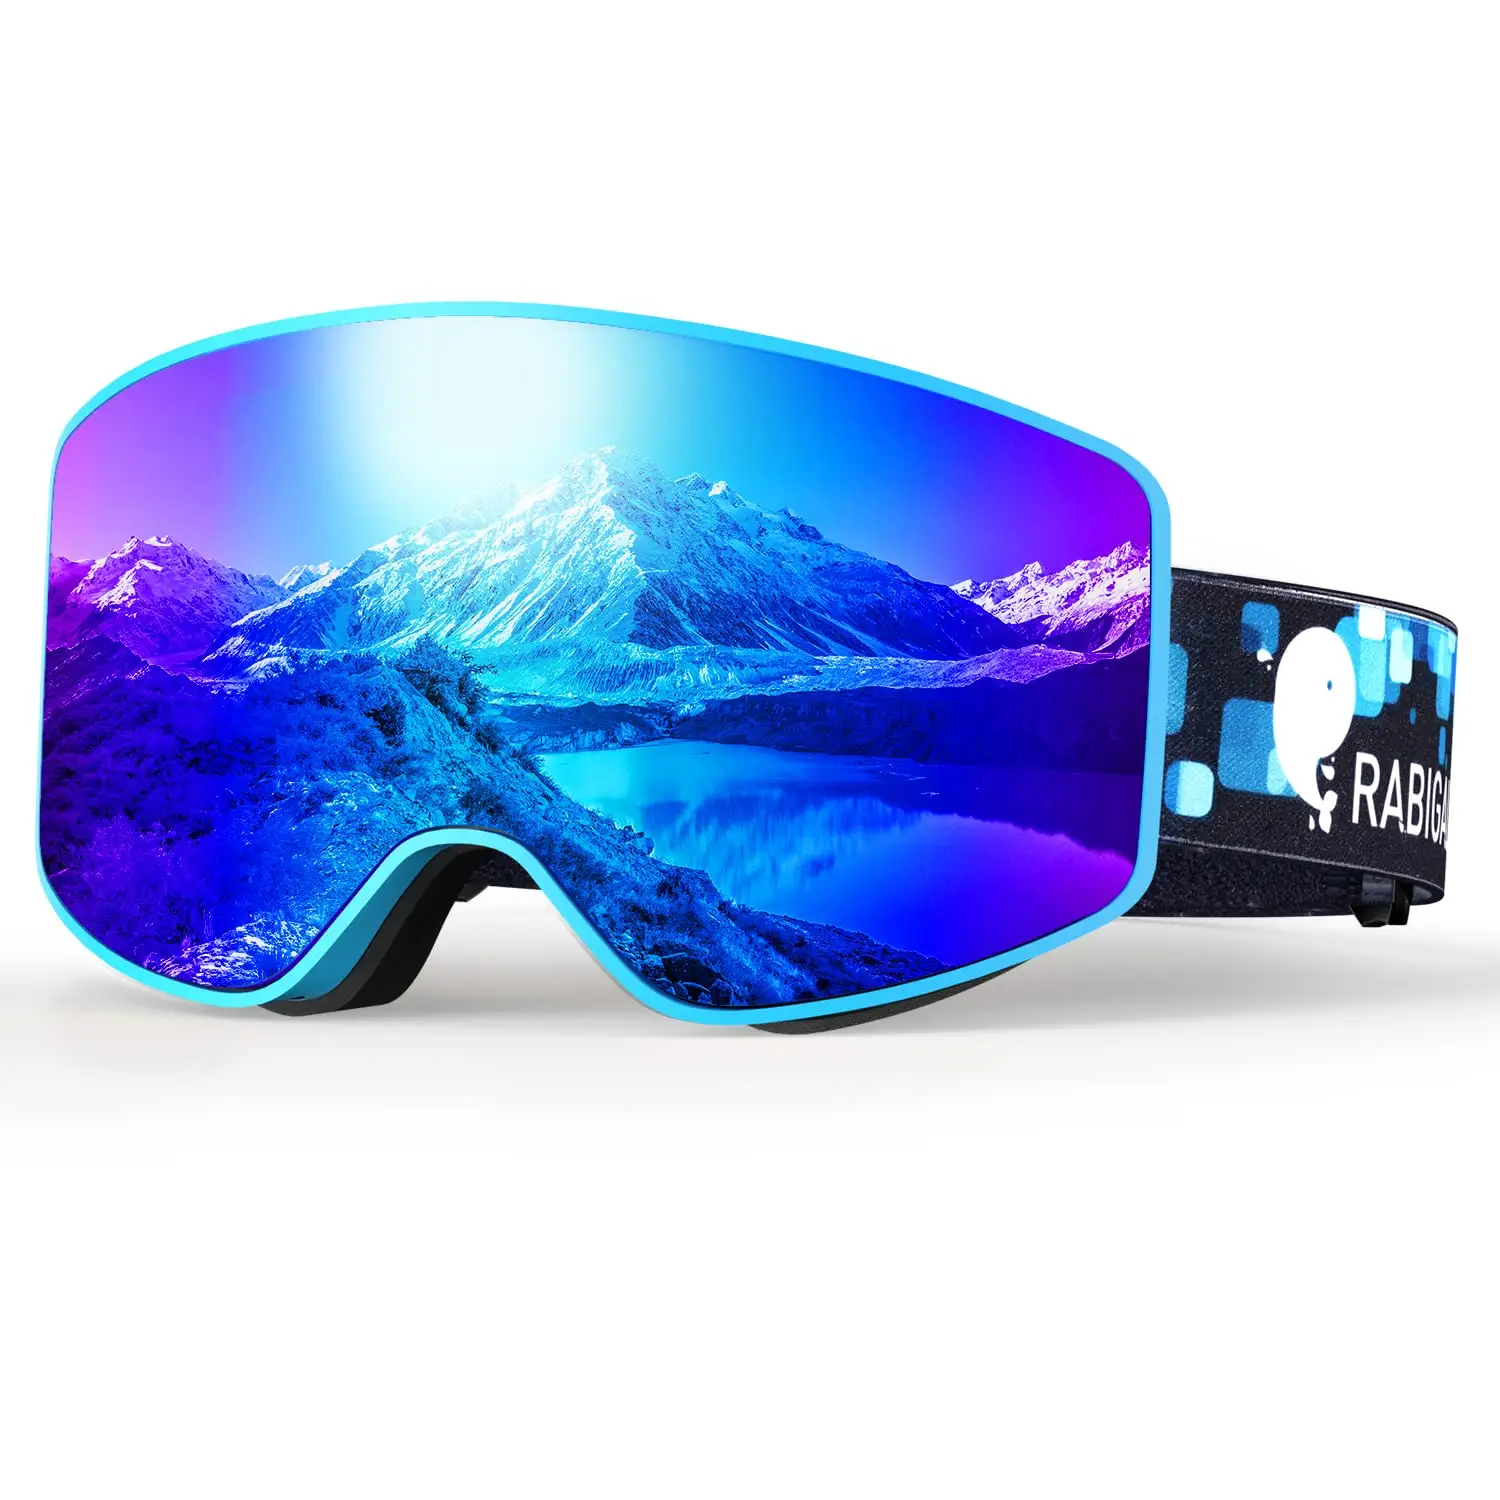 Factory UV400 Protection Snowboarding Sport Glasses Double Side Anti Fog Ski Goggles With Anti-slip Silicone On Strap